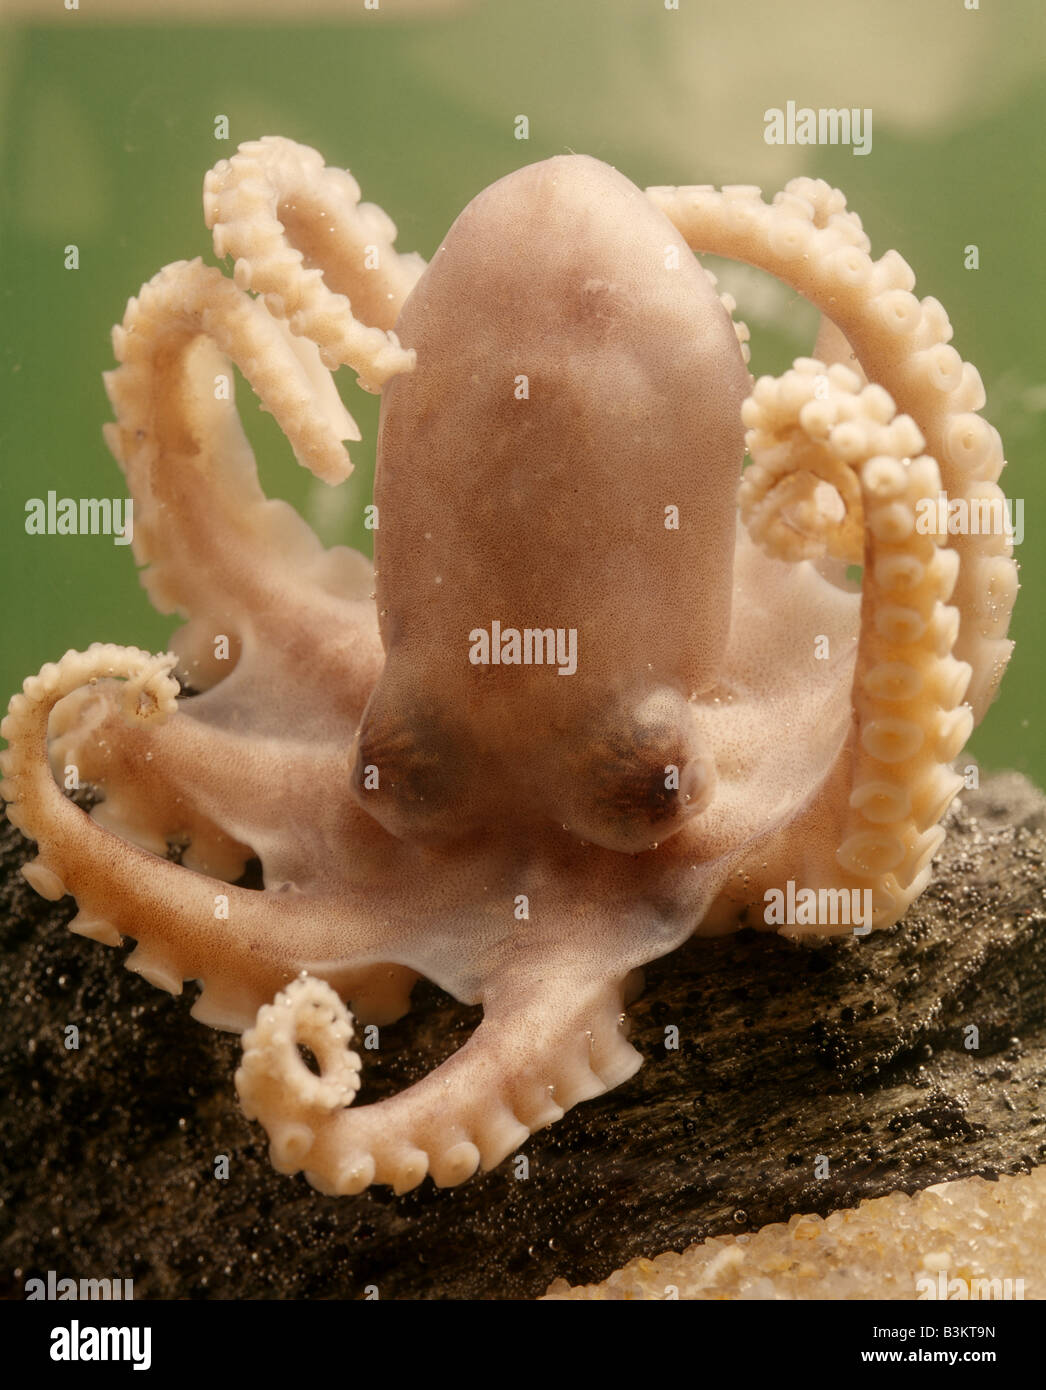 OCTOPUS OR DEVILFISH (OCTOPUS SP.) SHOWS EIGHT ARMS WITH SUCKERS AND HEAD WITH EYES 1X Stock Photo